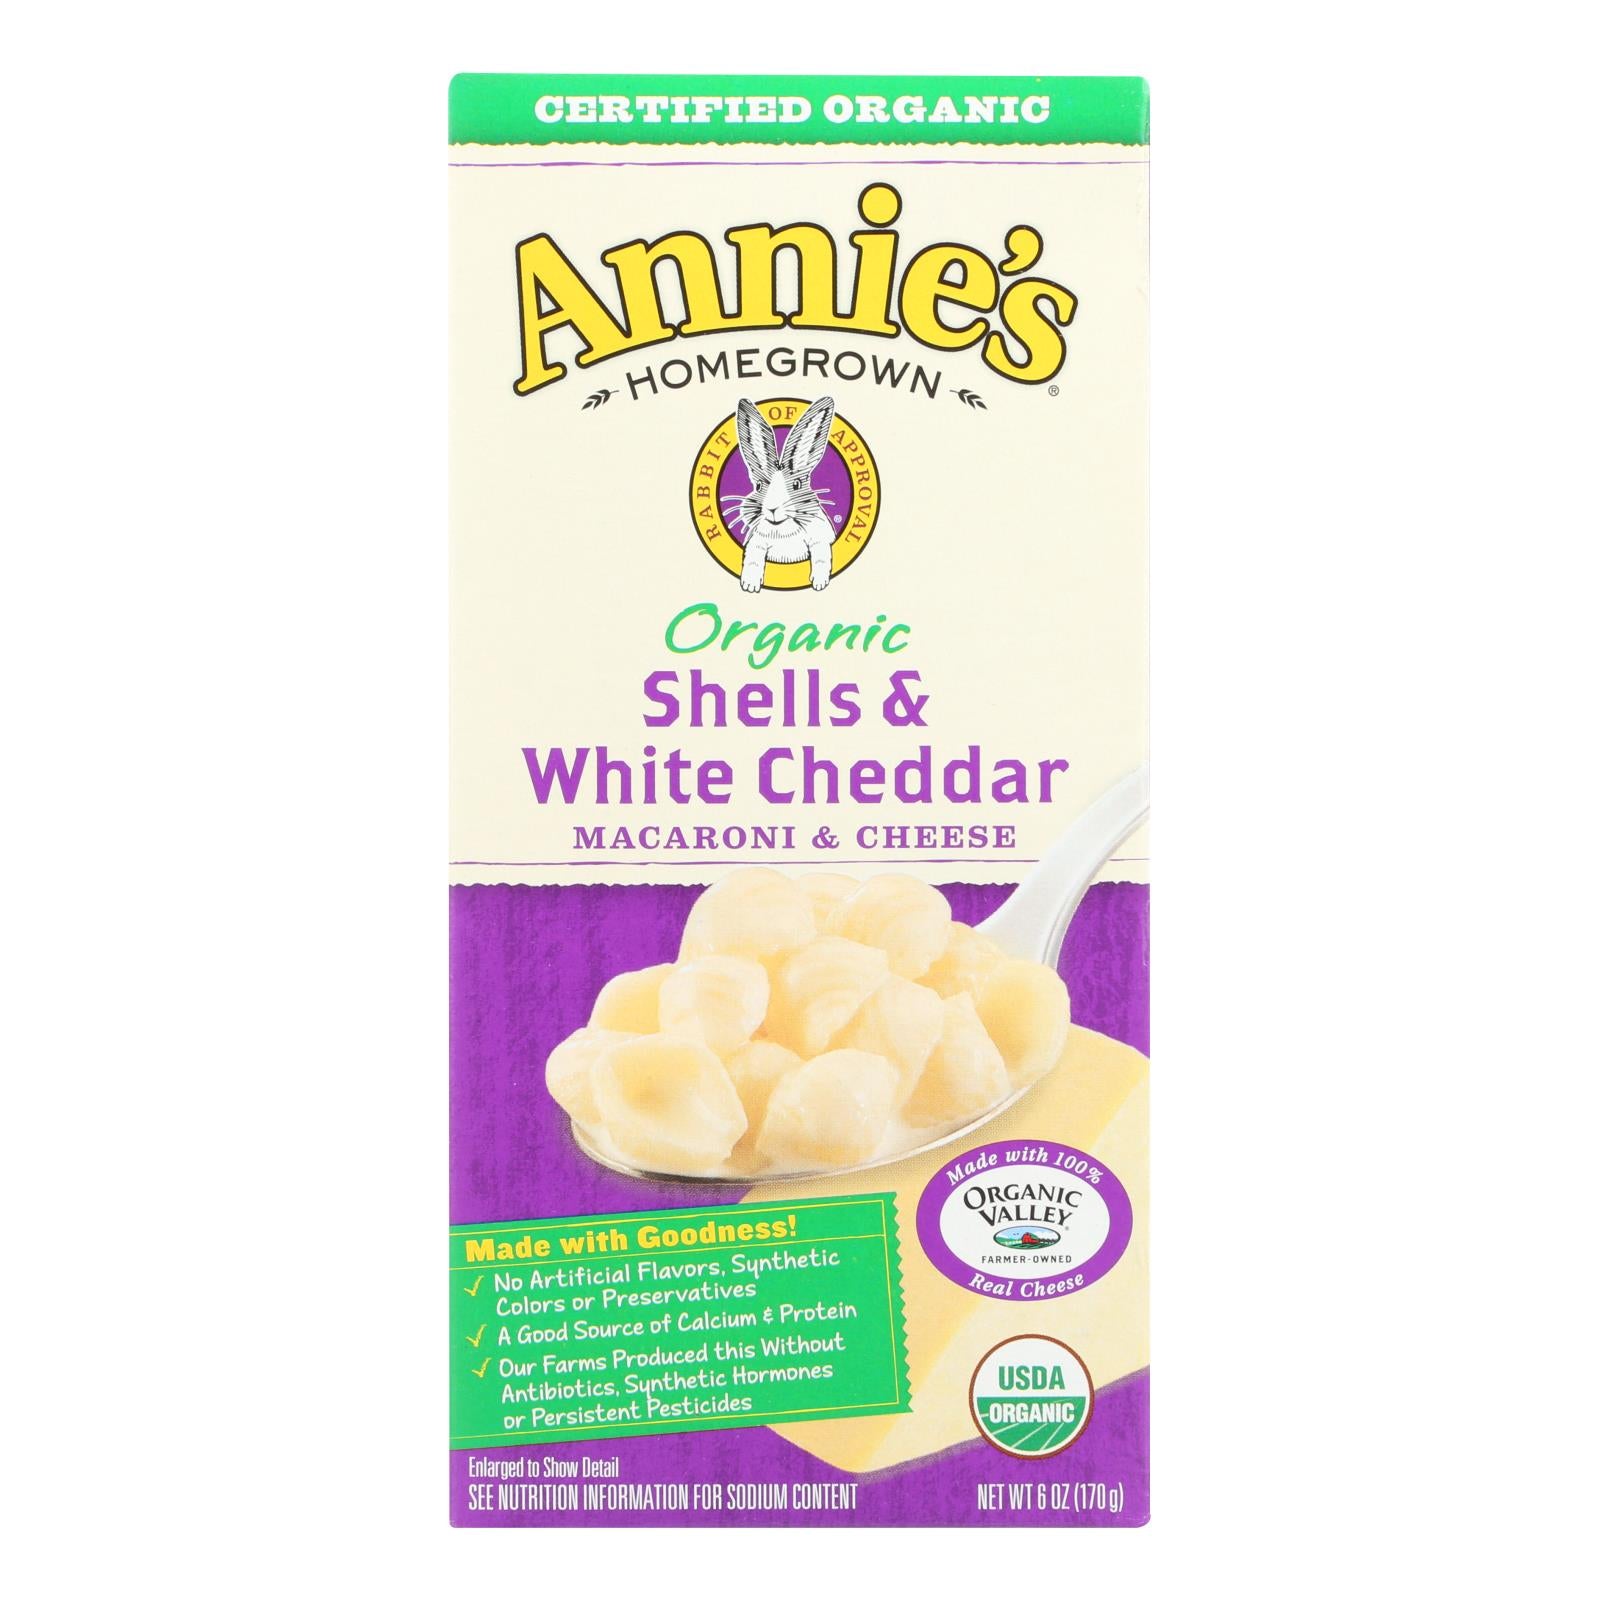 Annie'S Homegrown, Annie's Homegrown Organic Shells and White Cheddar Macaroni and Cheese - Case of 12 - 6 oz. (Pack of 12)